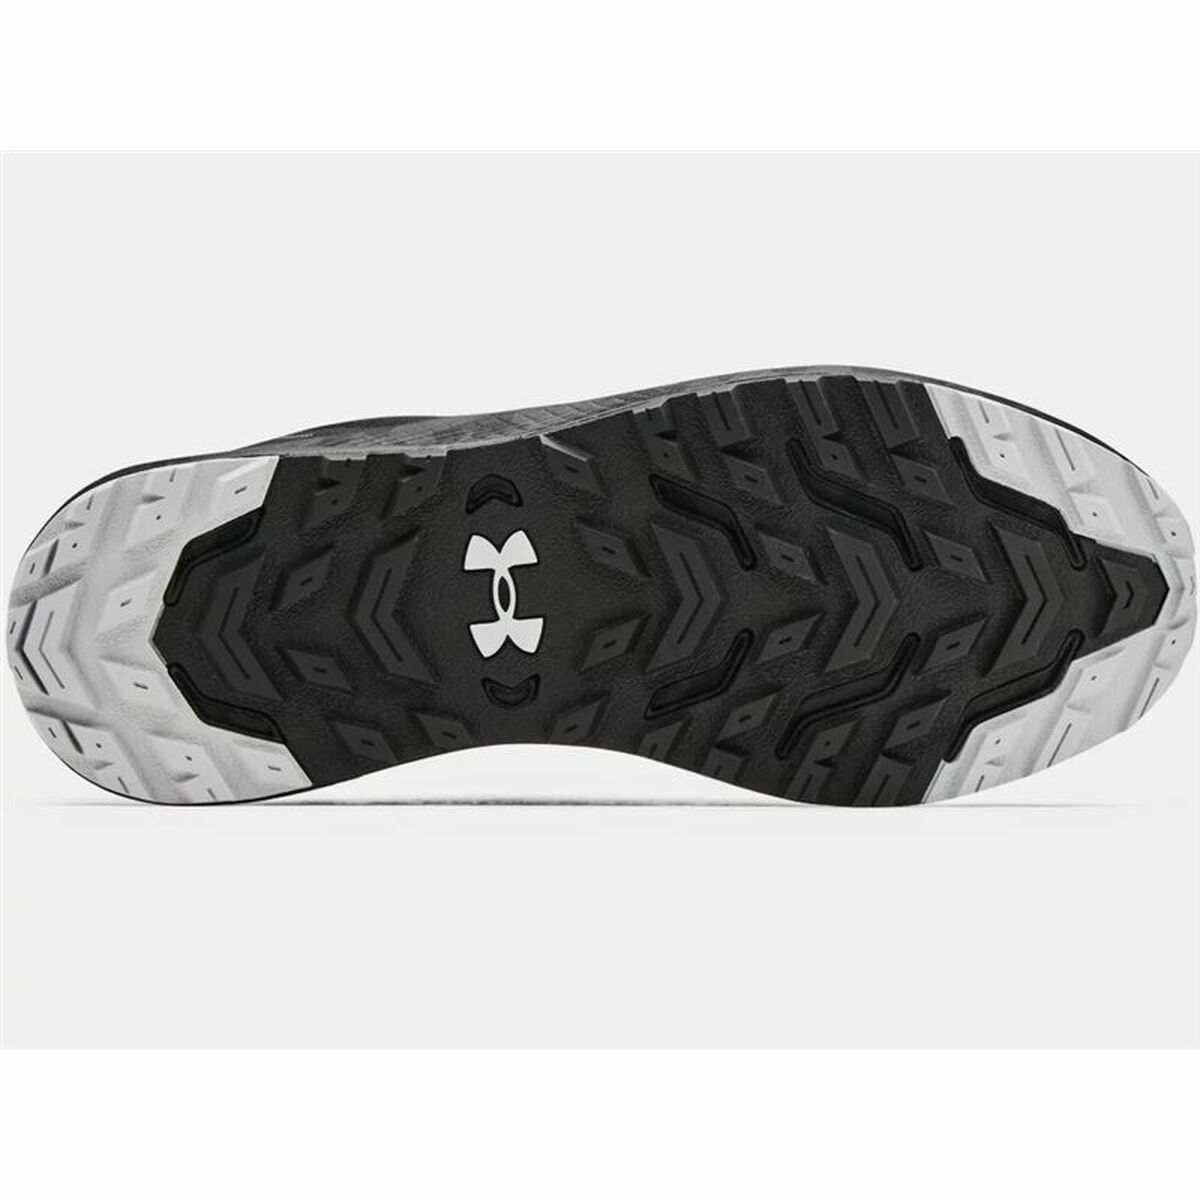 Men's Trainers Under Armour Charged Bandit 2 Black